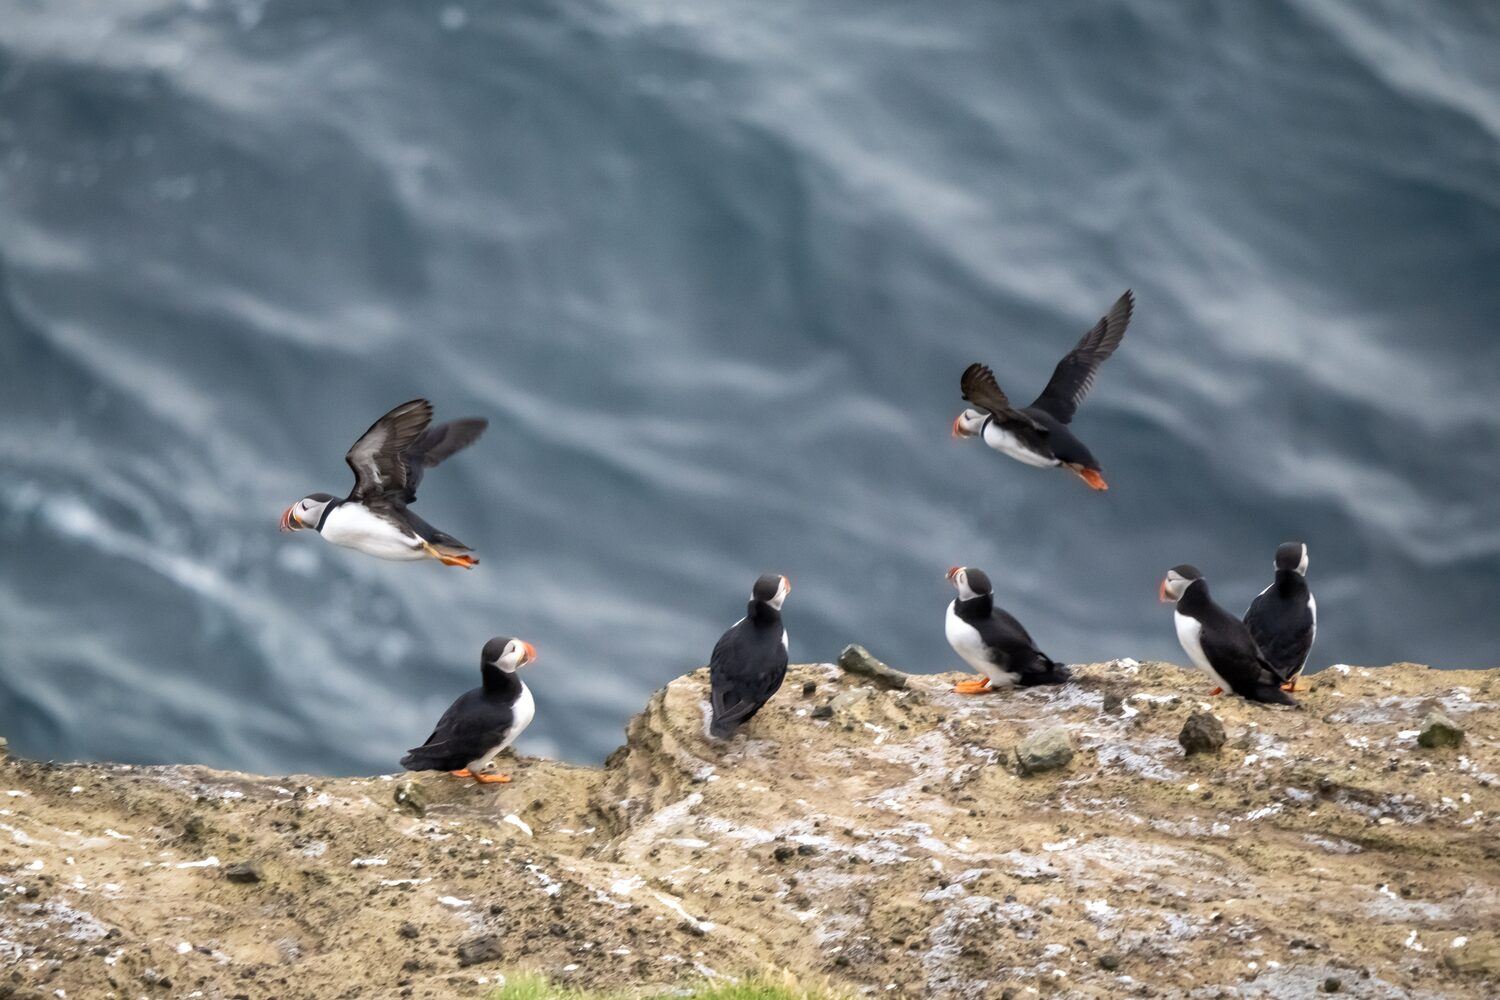 Atlantic puffin colonies on the cliffs of Storhofdi, Vestmannaeyjar (Westman Islands) off the south coast of Iceland